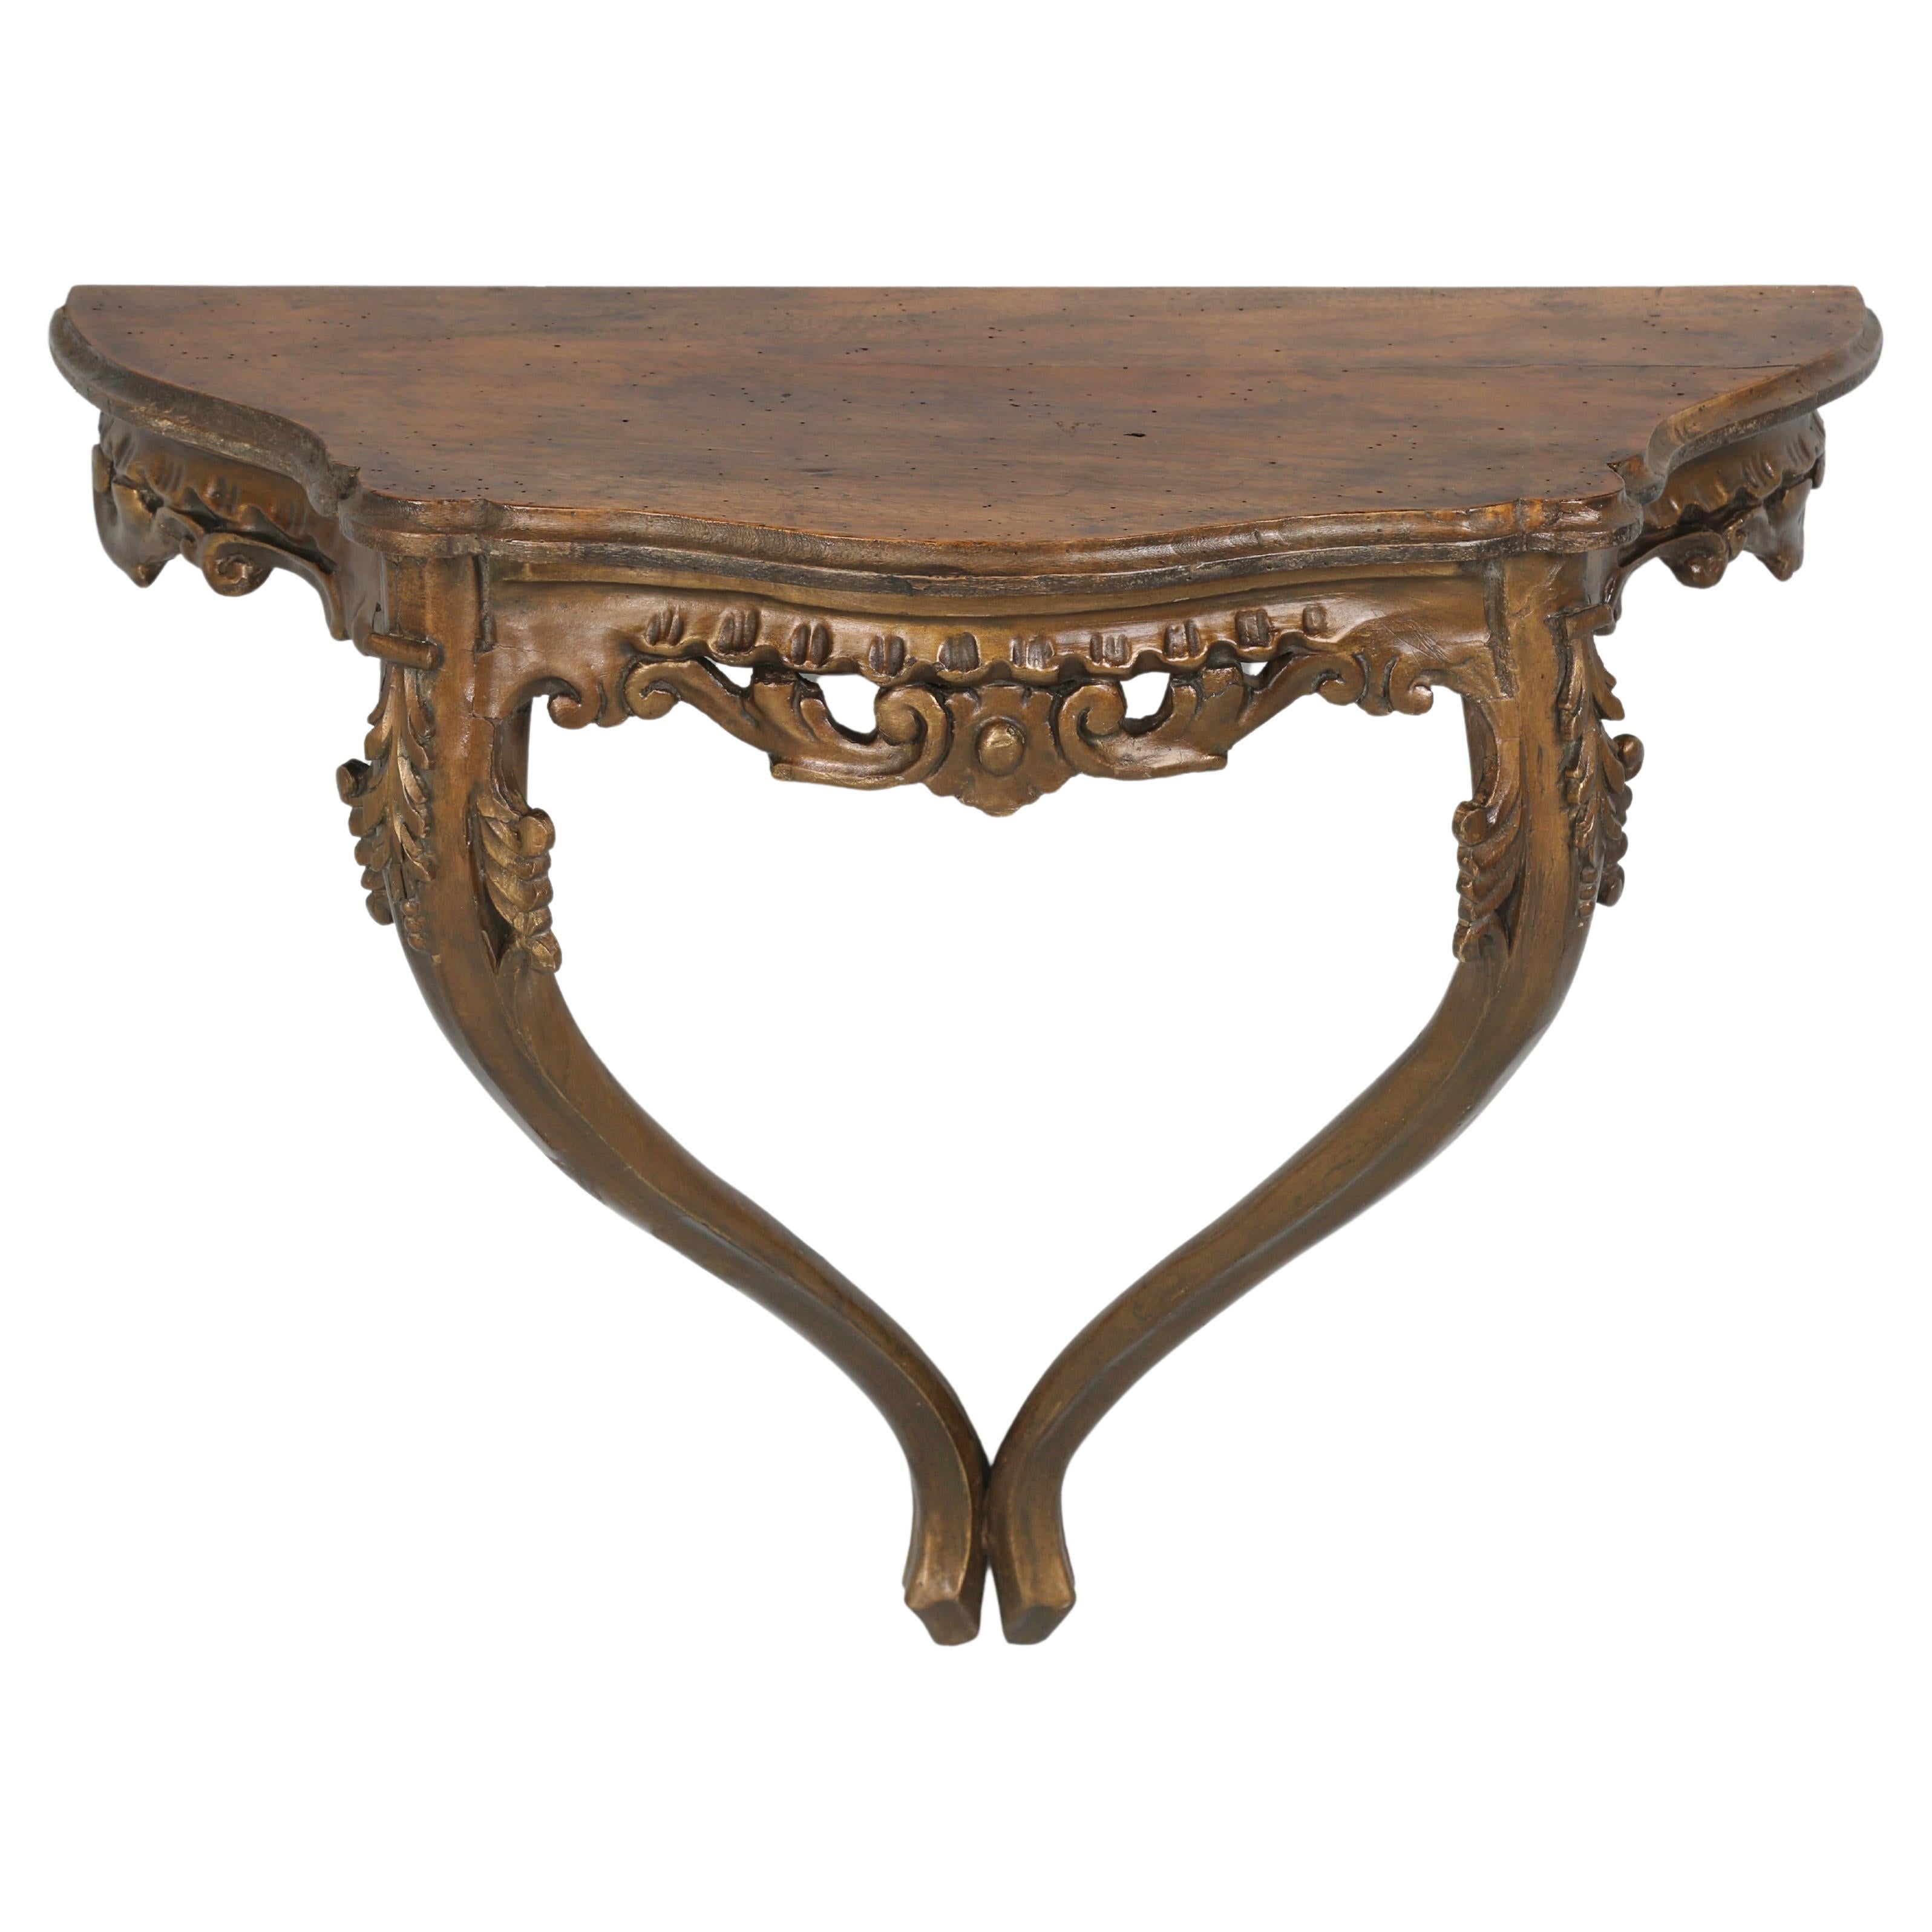 Antique French Hand-Carved Wall-Mounted Console Table c1900 Very Diminutive